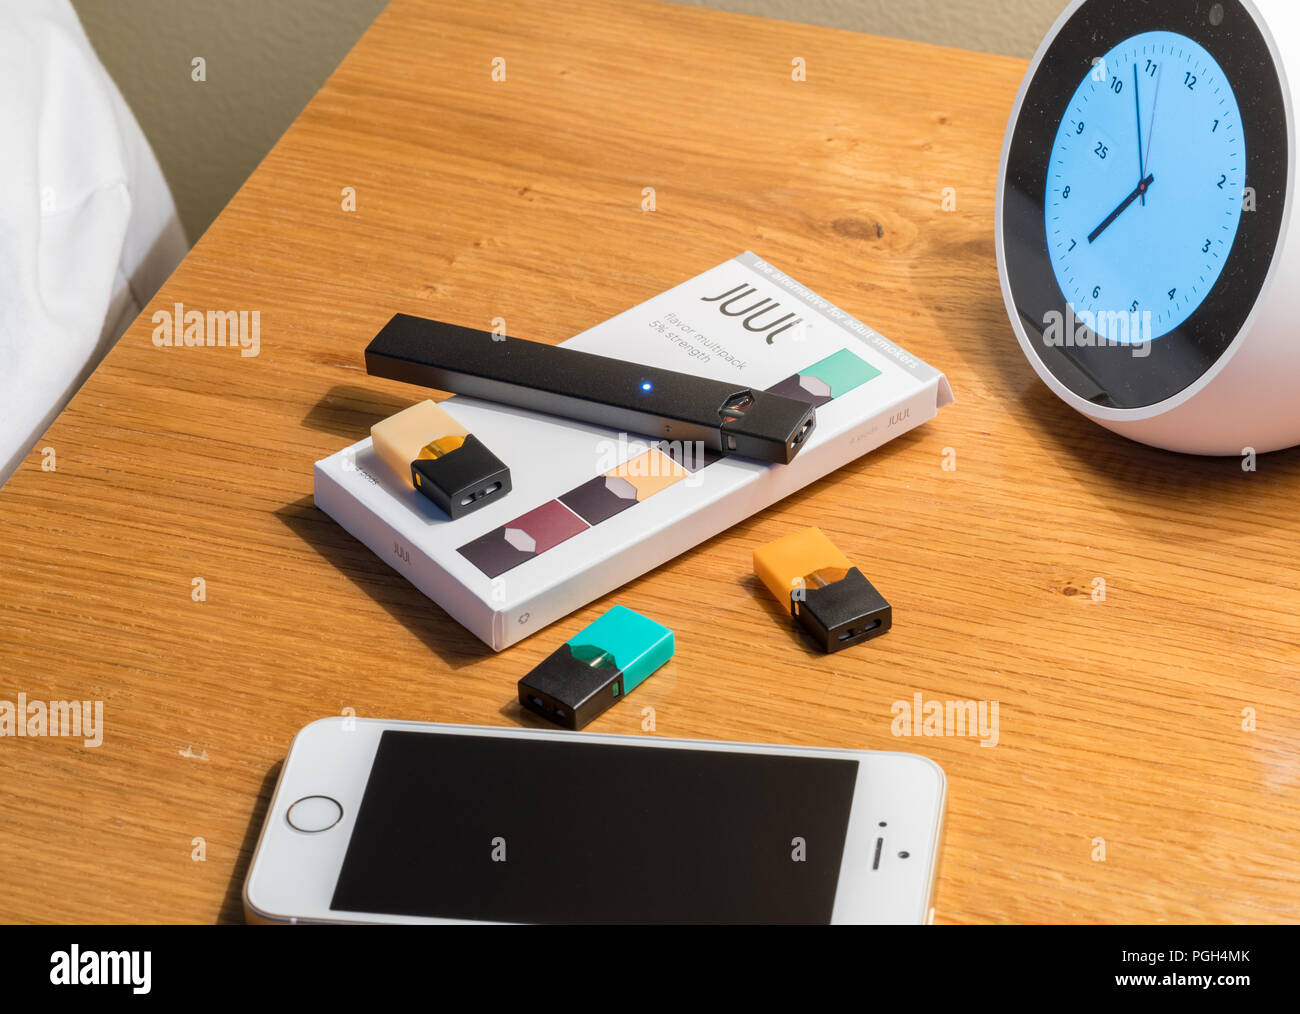 Box holding JUUL nicotine dispenser and pods on bedside table Stock Photo